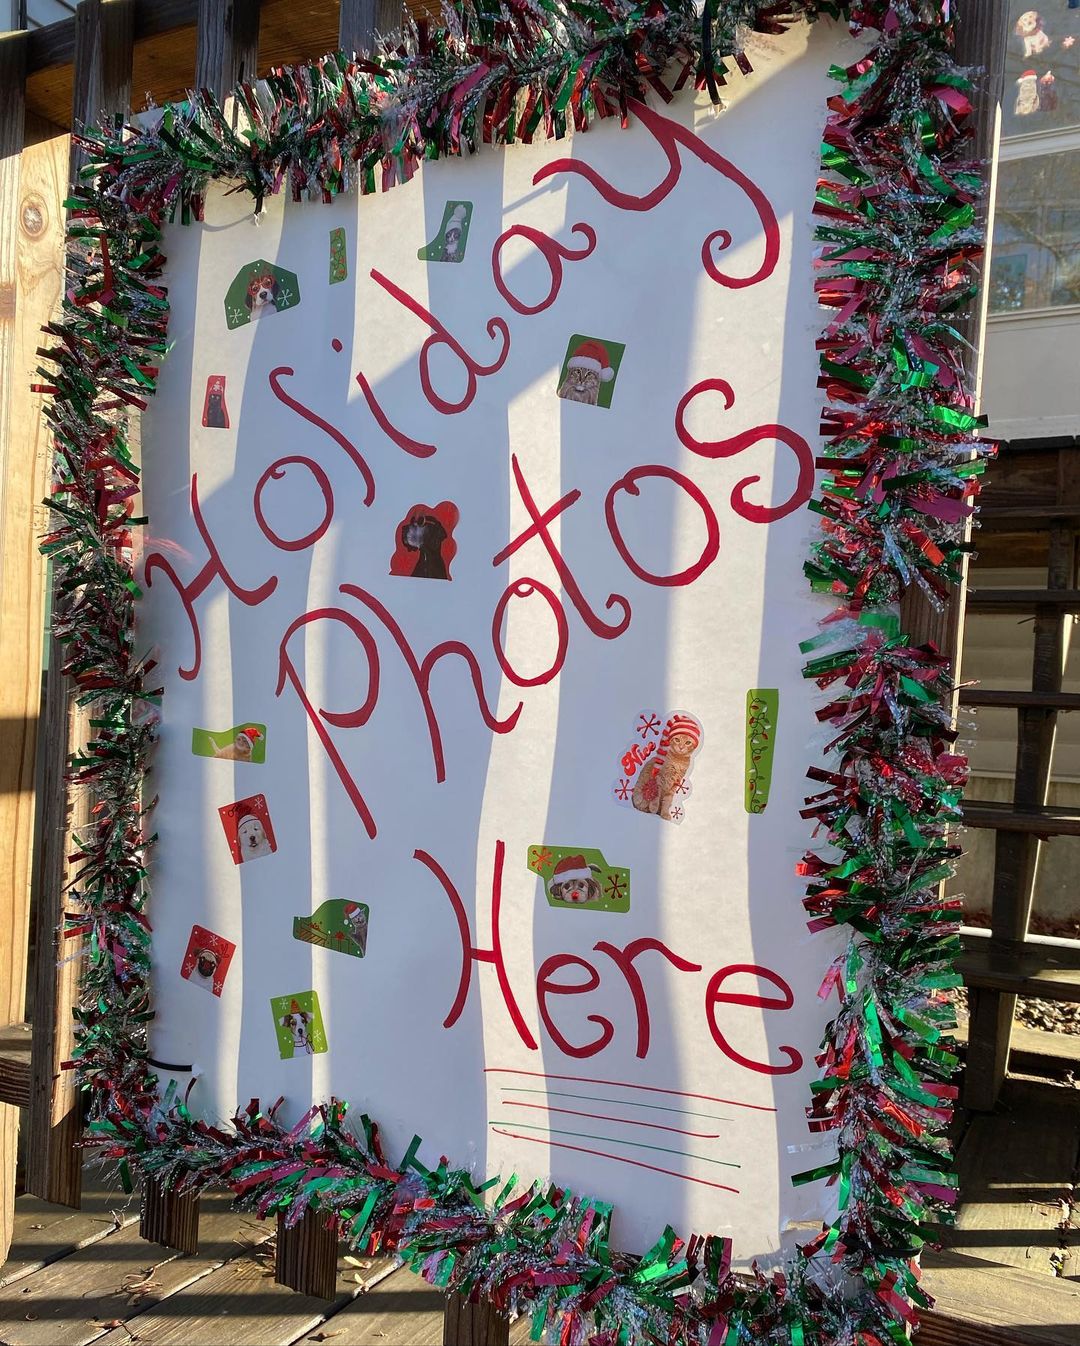 HOLIDAY PHOTO FUNDRAISER TODAY with Wildside Photography with Lisa Boisvert!!! Walk-In’s welcome. $50.00 sitting fee. Holiday shoppers welcome too! Holiday calendar are now available $20. 10-4:30pm